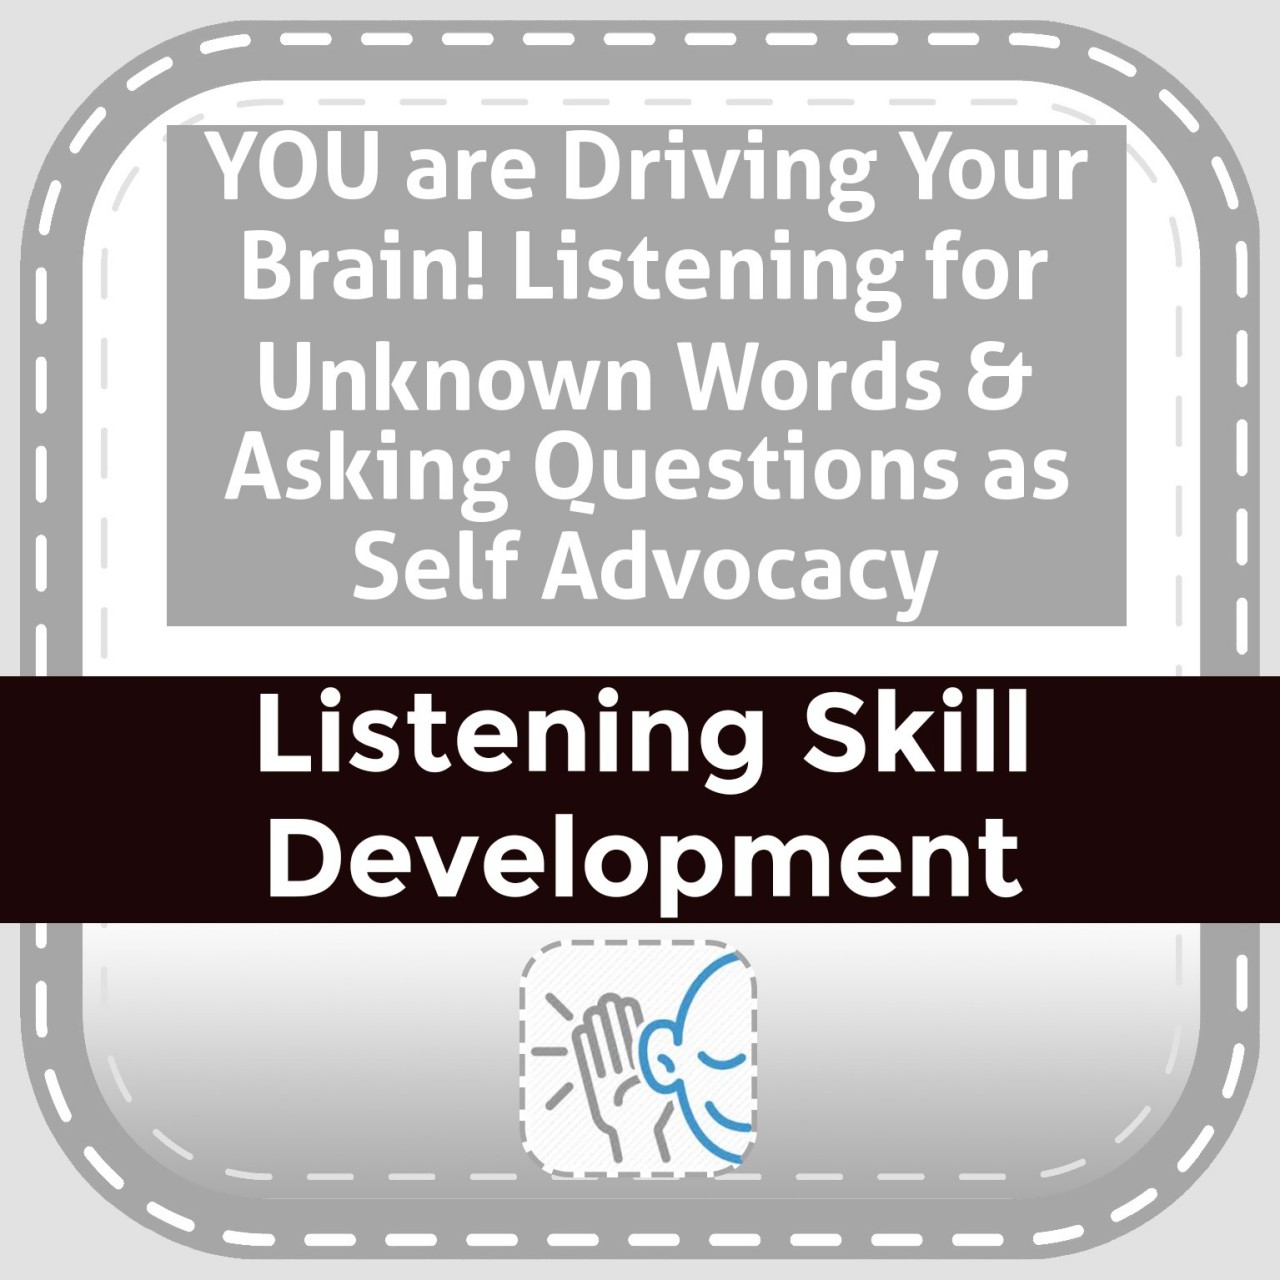 YOU are Driving Your Brain! Listening for Unknown Words & Asking Questions as Self Advocacy